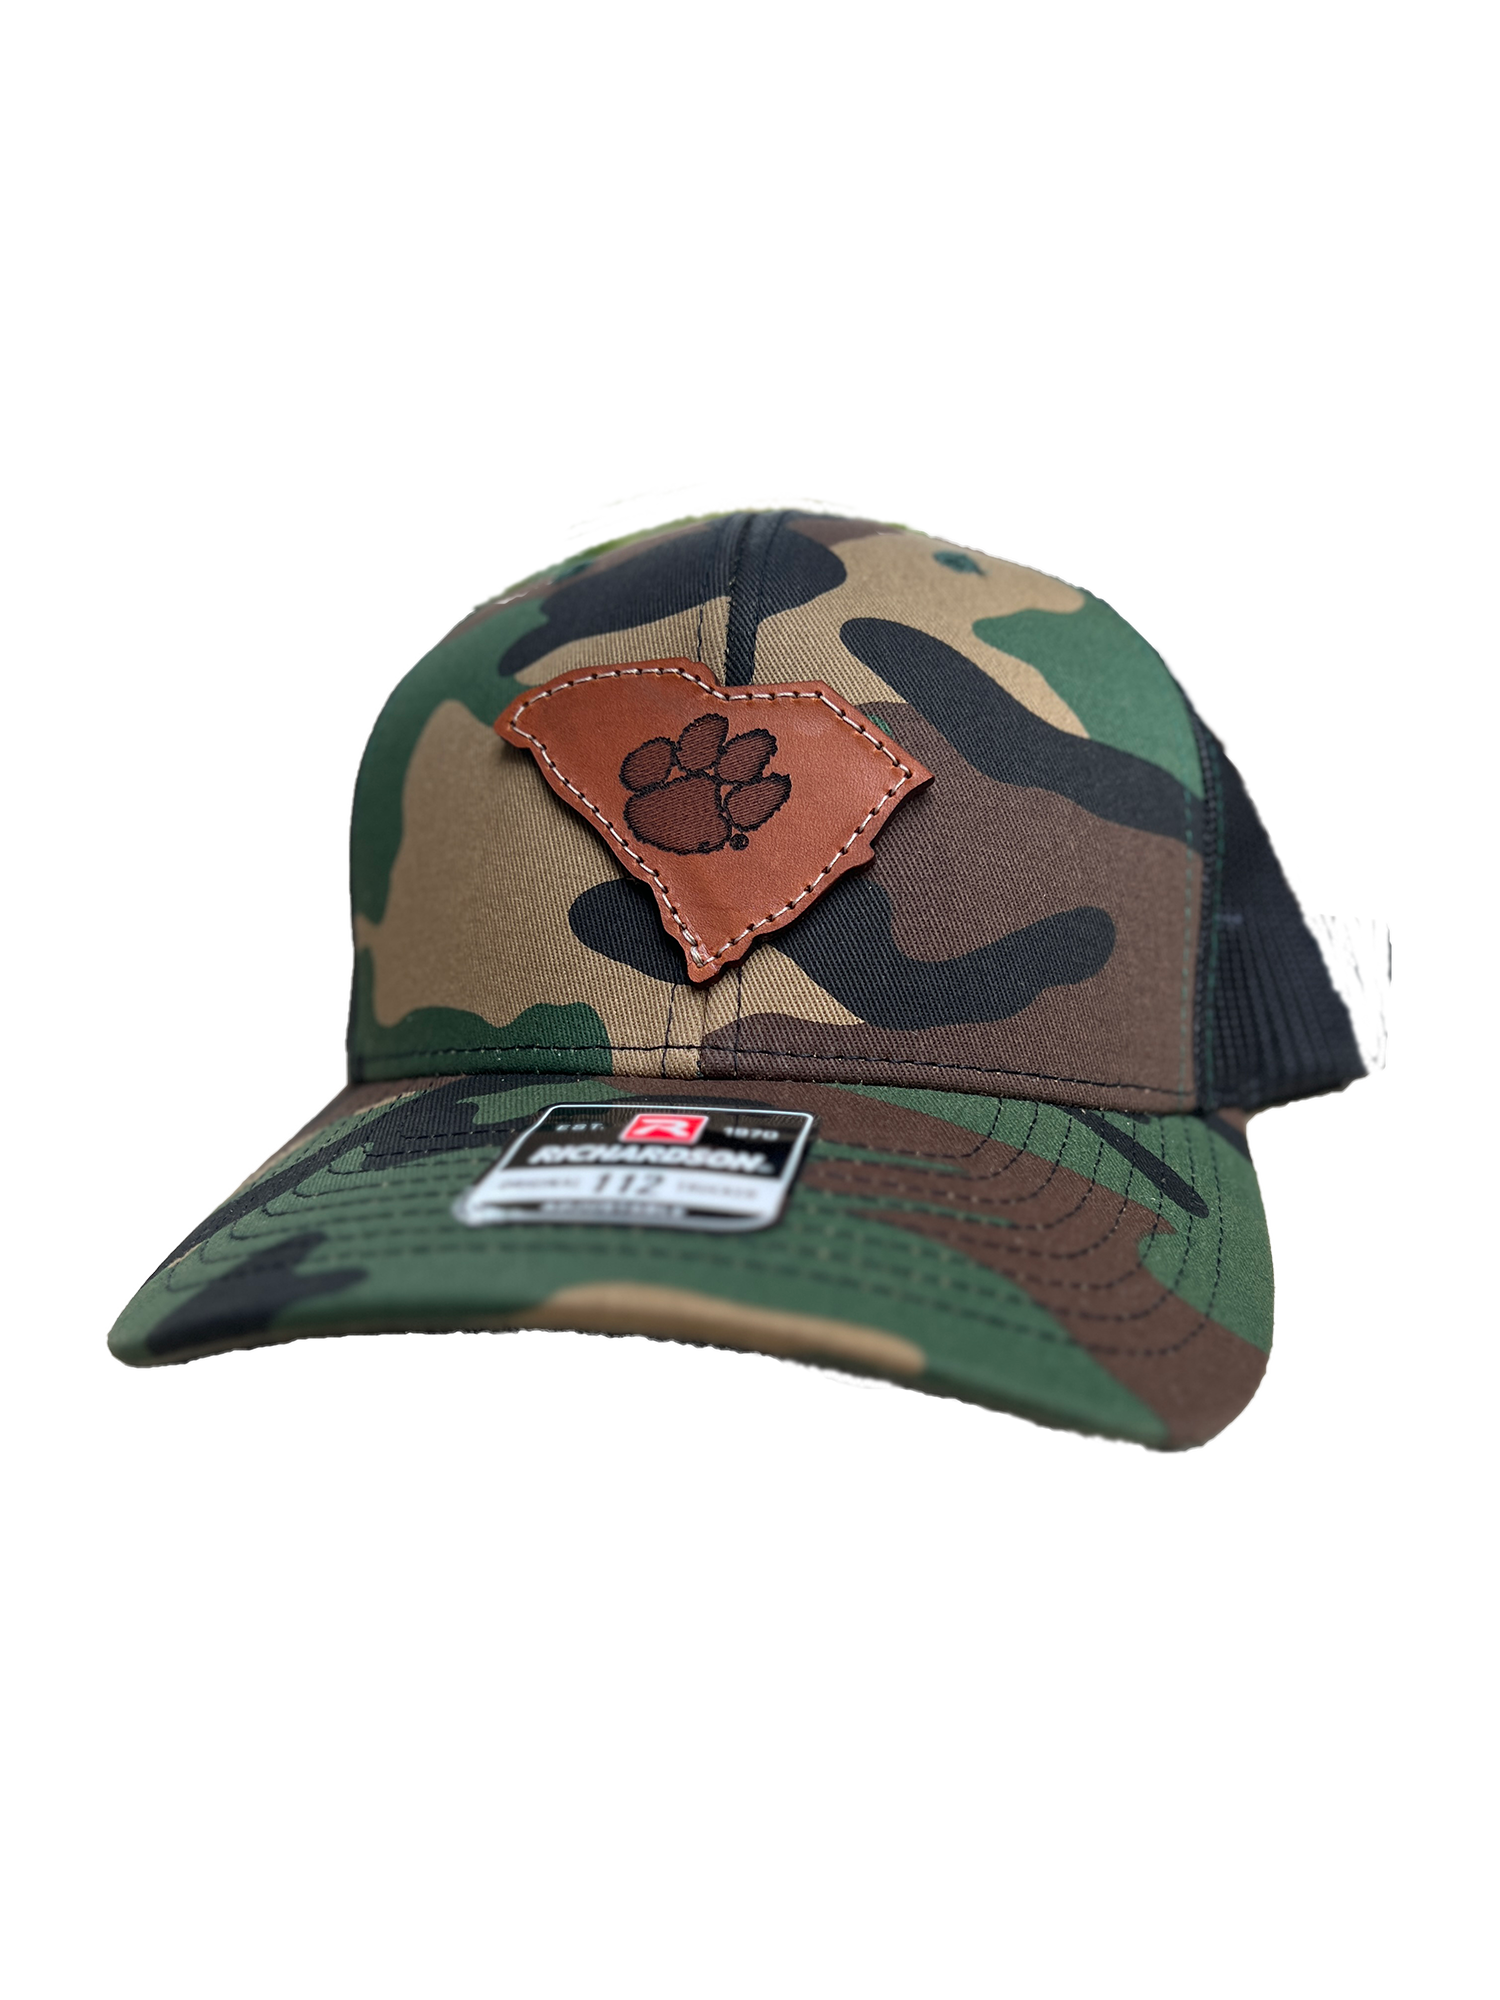 Clemson Tigers Leather South Carolina Patch Trucker Hat-(State Tiger Paw) Camo/Black